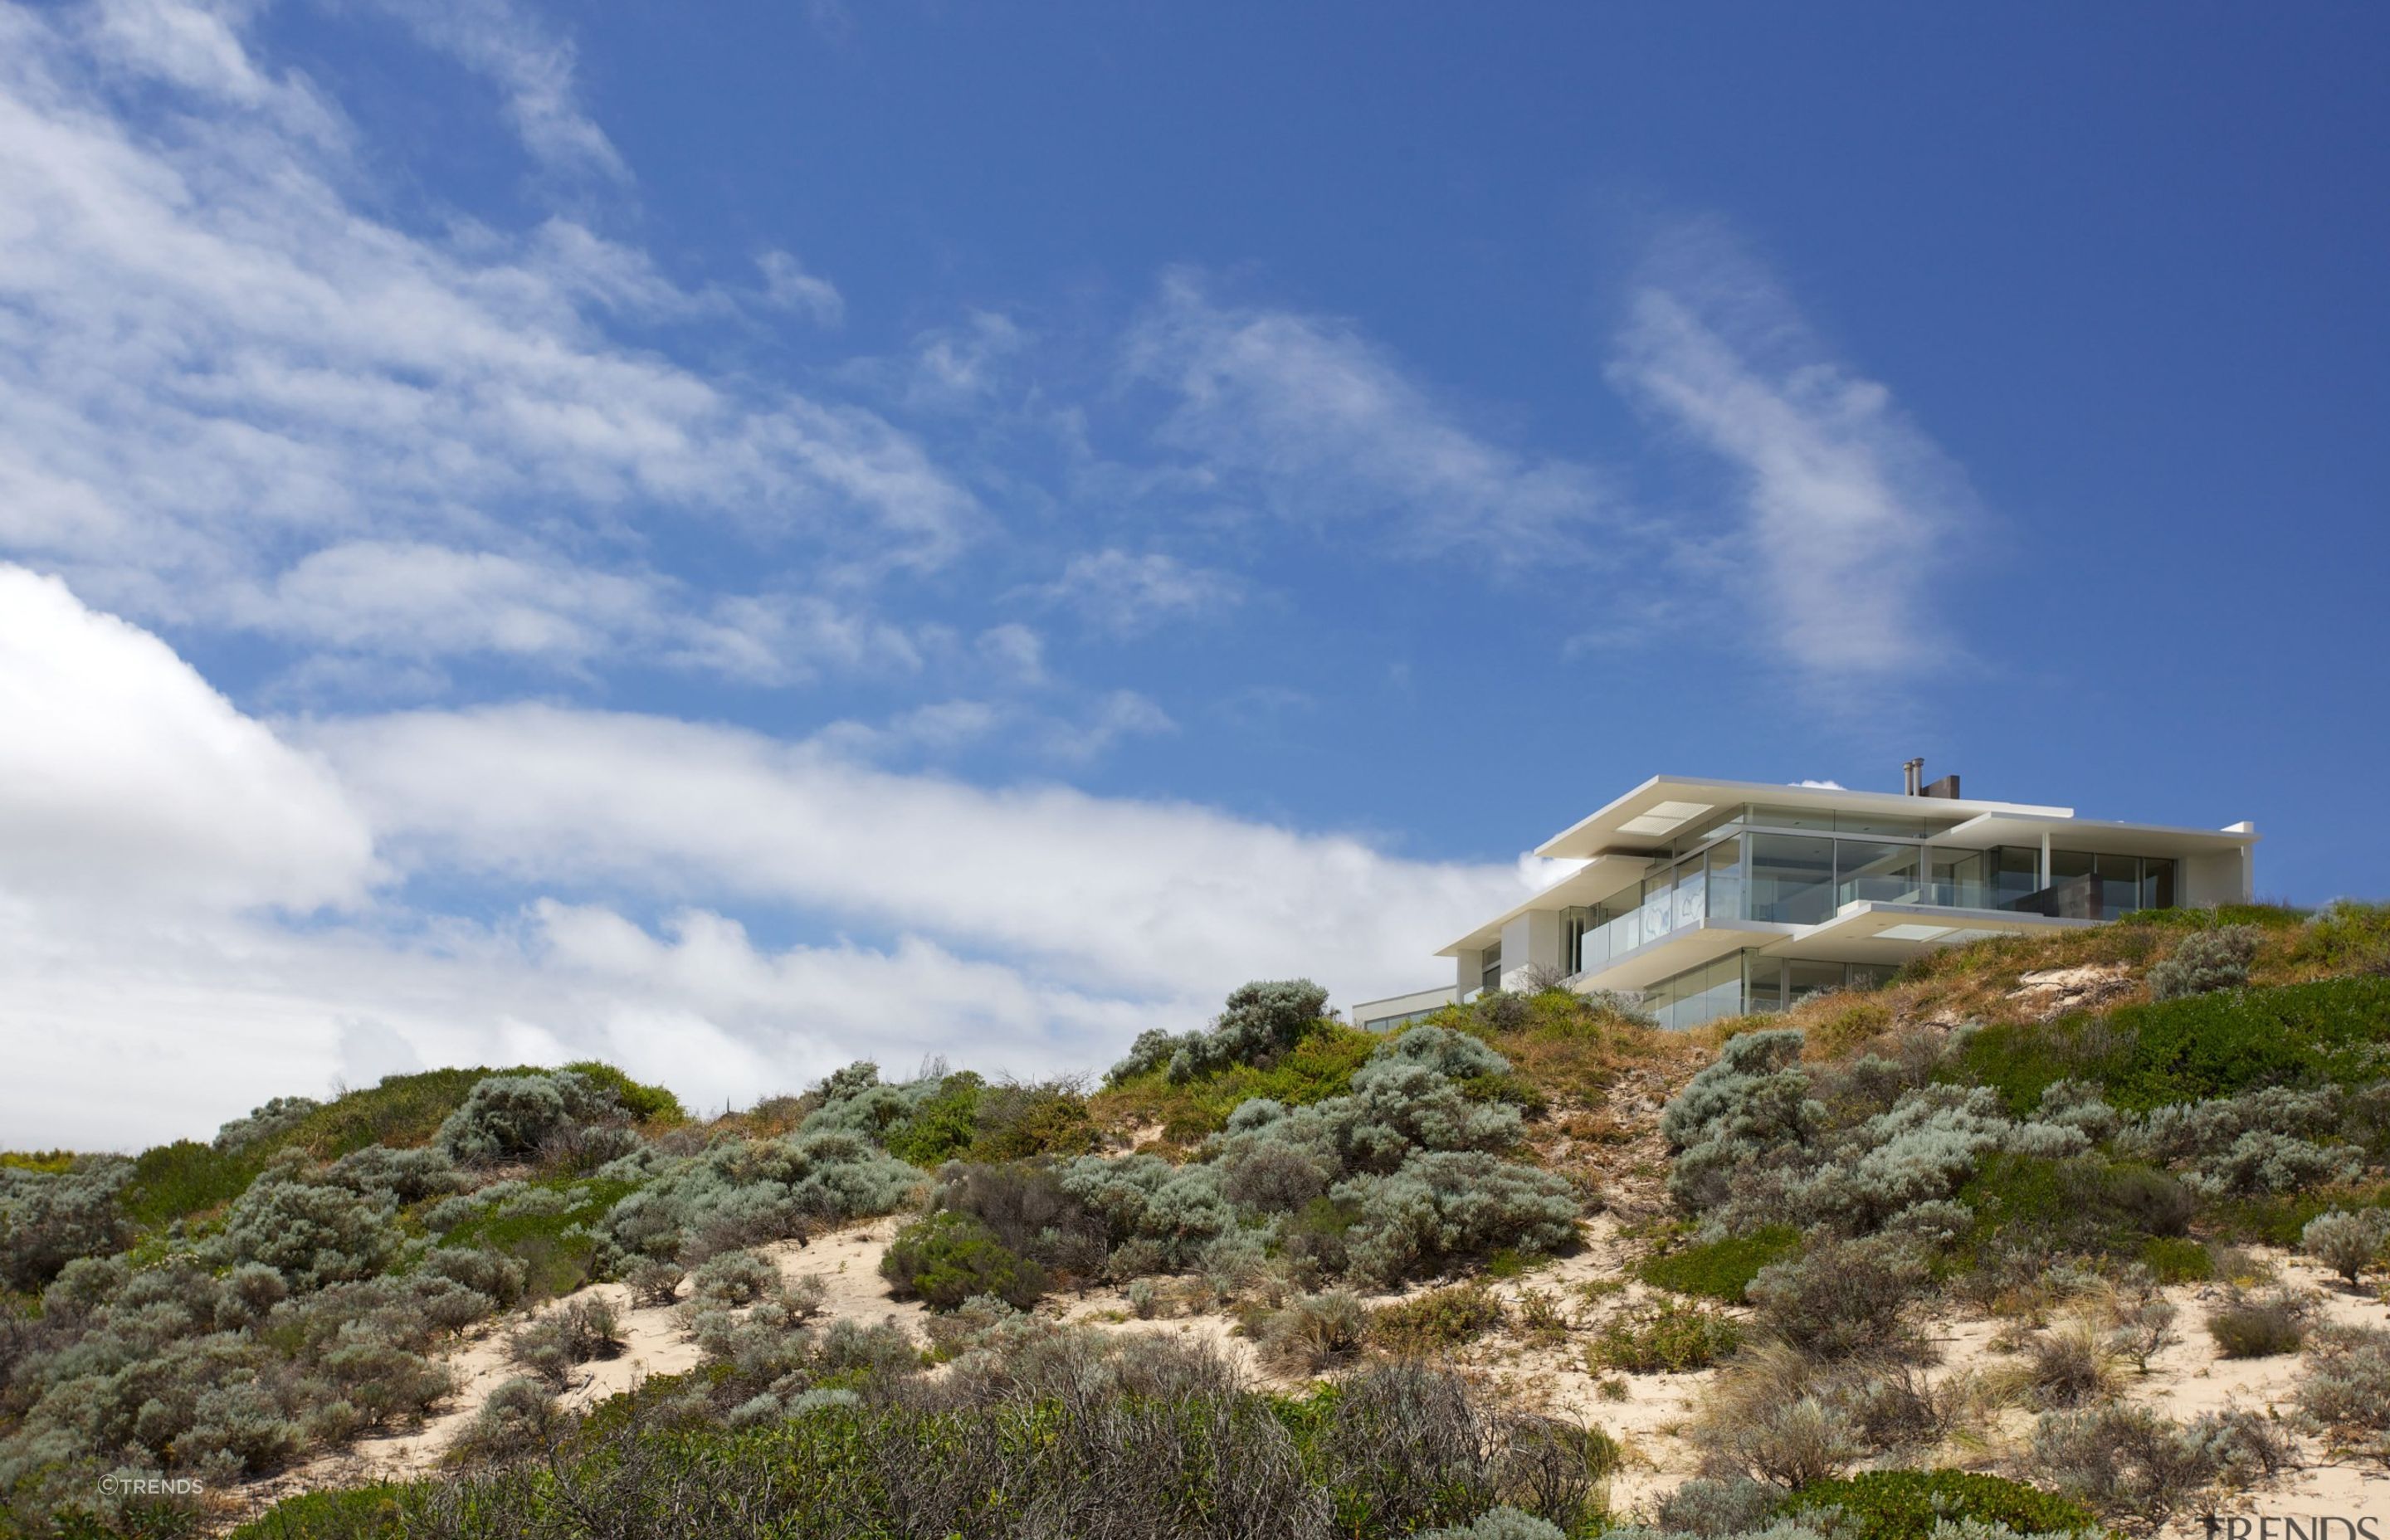 AIA - WA Architecture Award - Nestled in the Sand Dunes